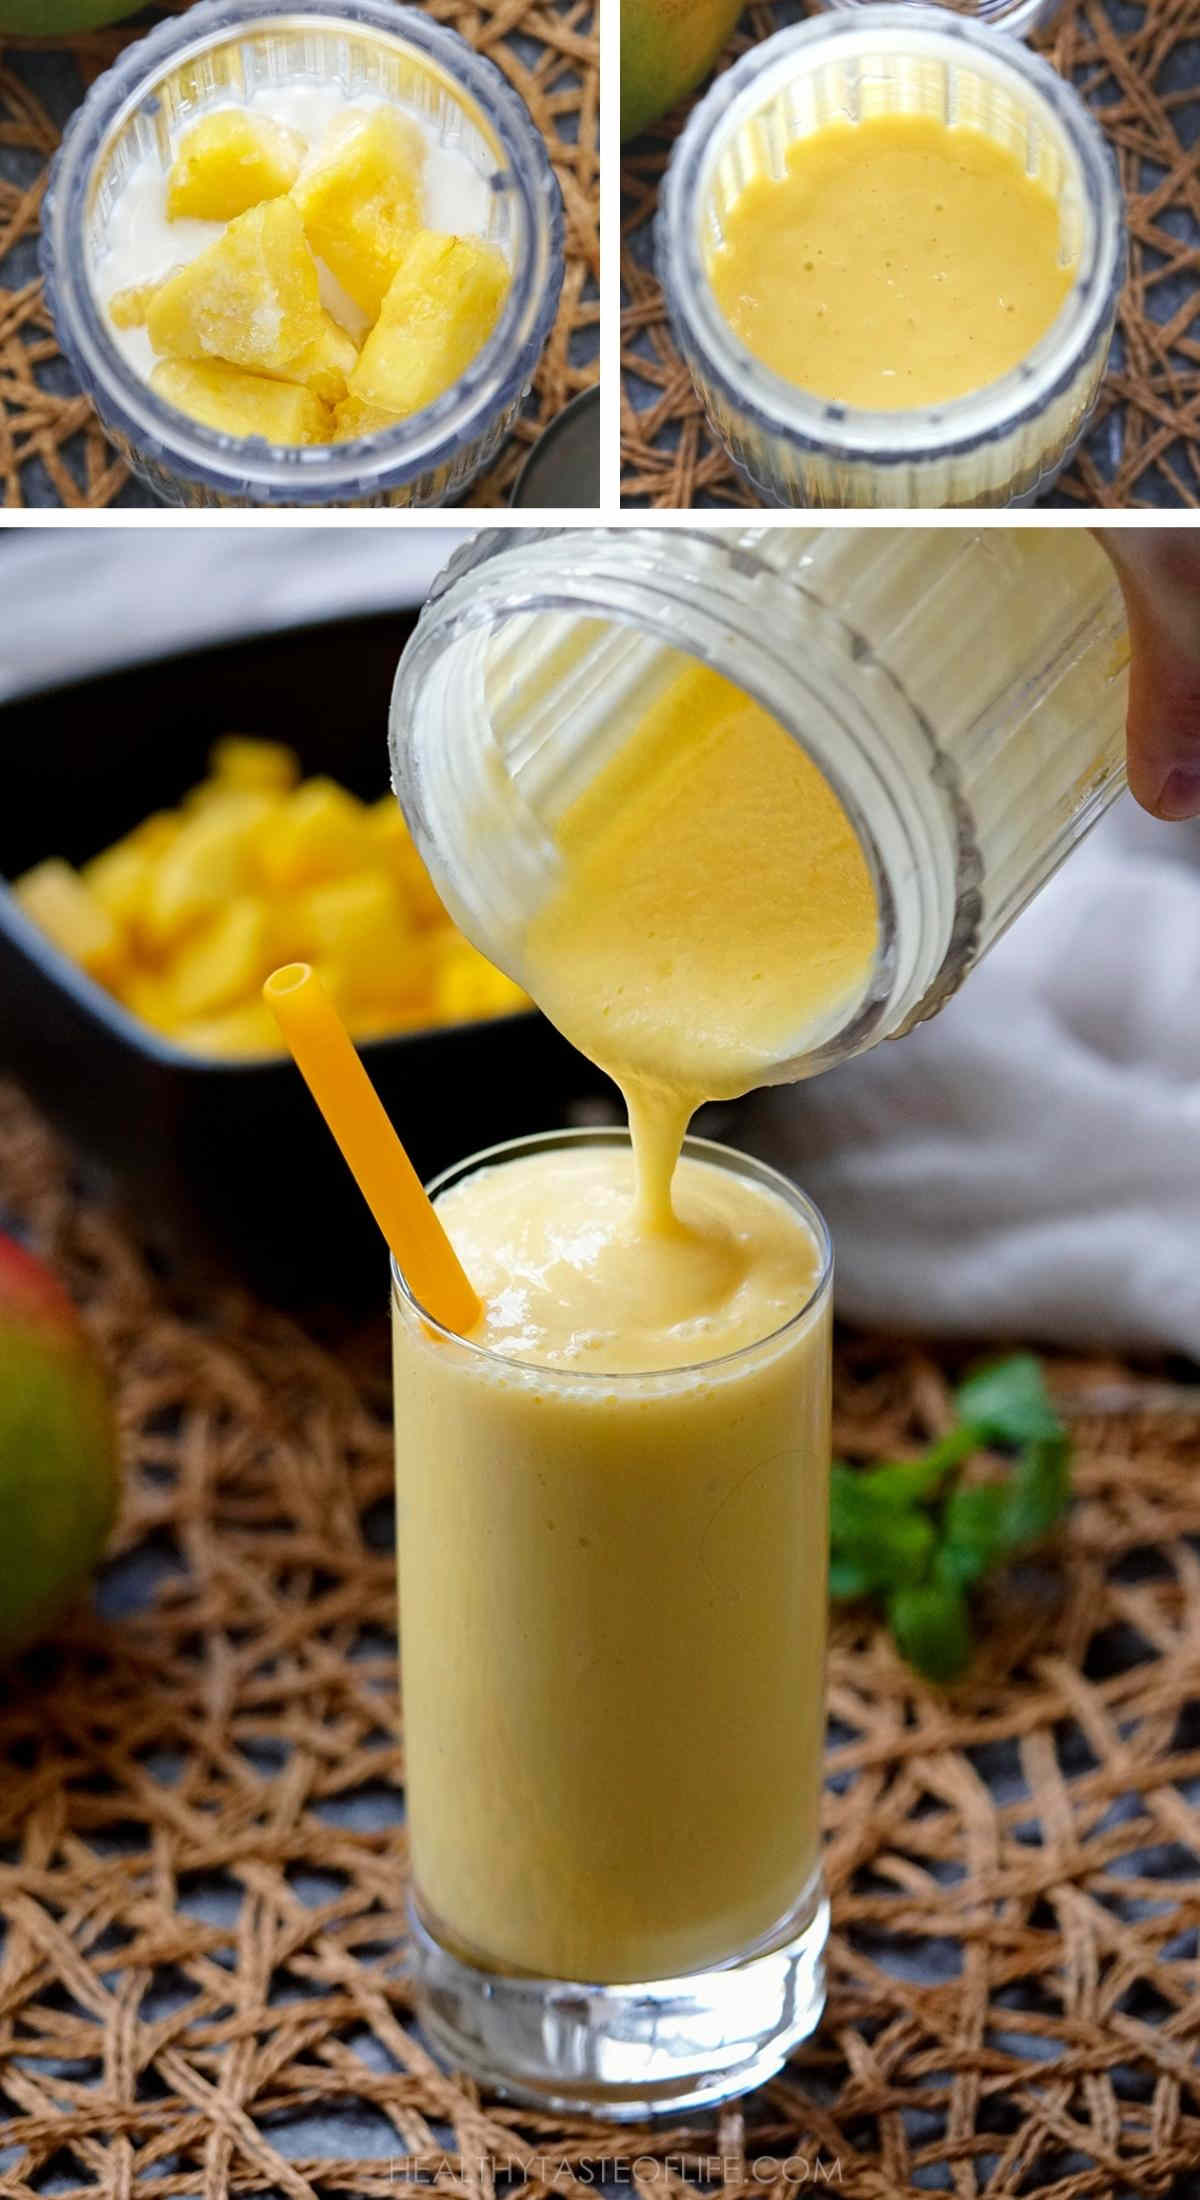 Process shots showing how to make pineapple mango smoothie recipe.